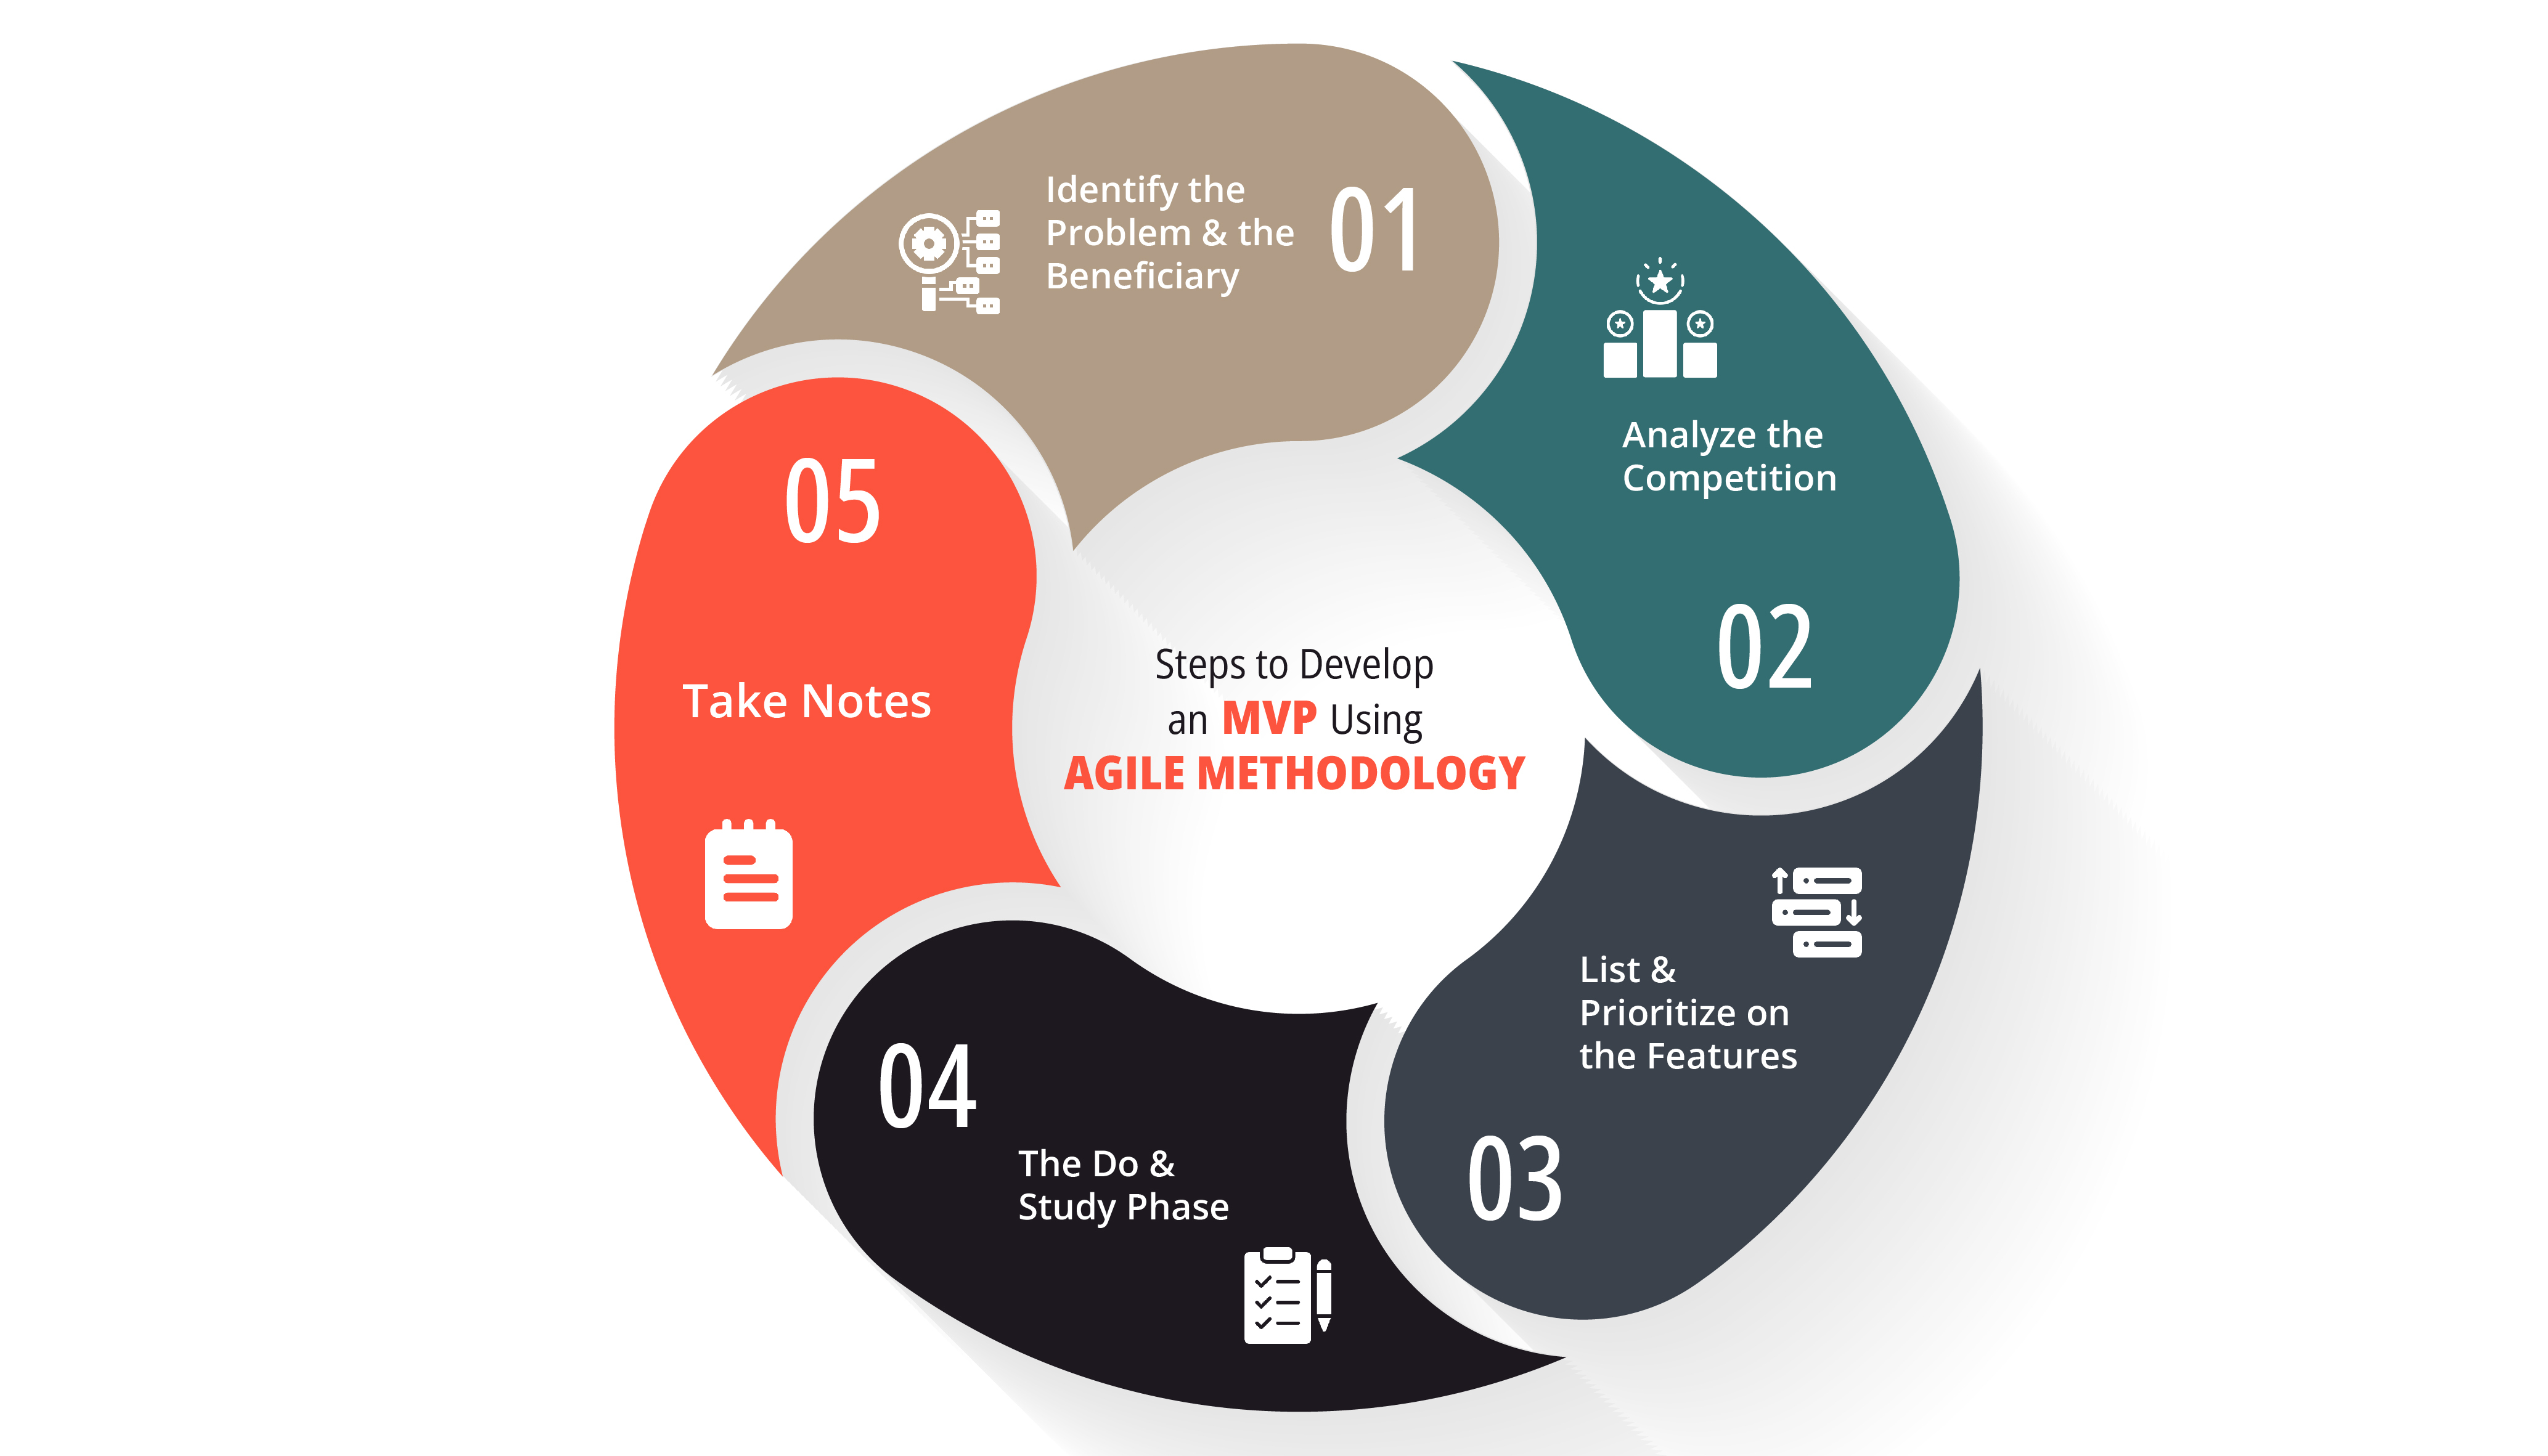 Steps to develop an MVP using agile methodology 